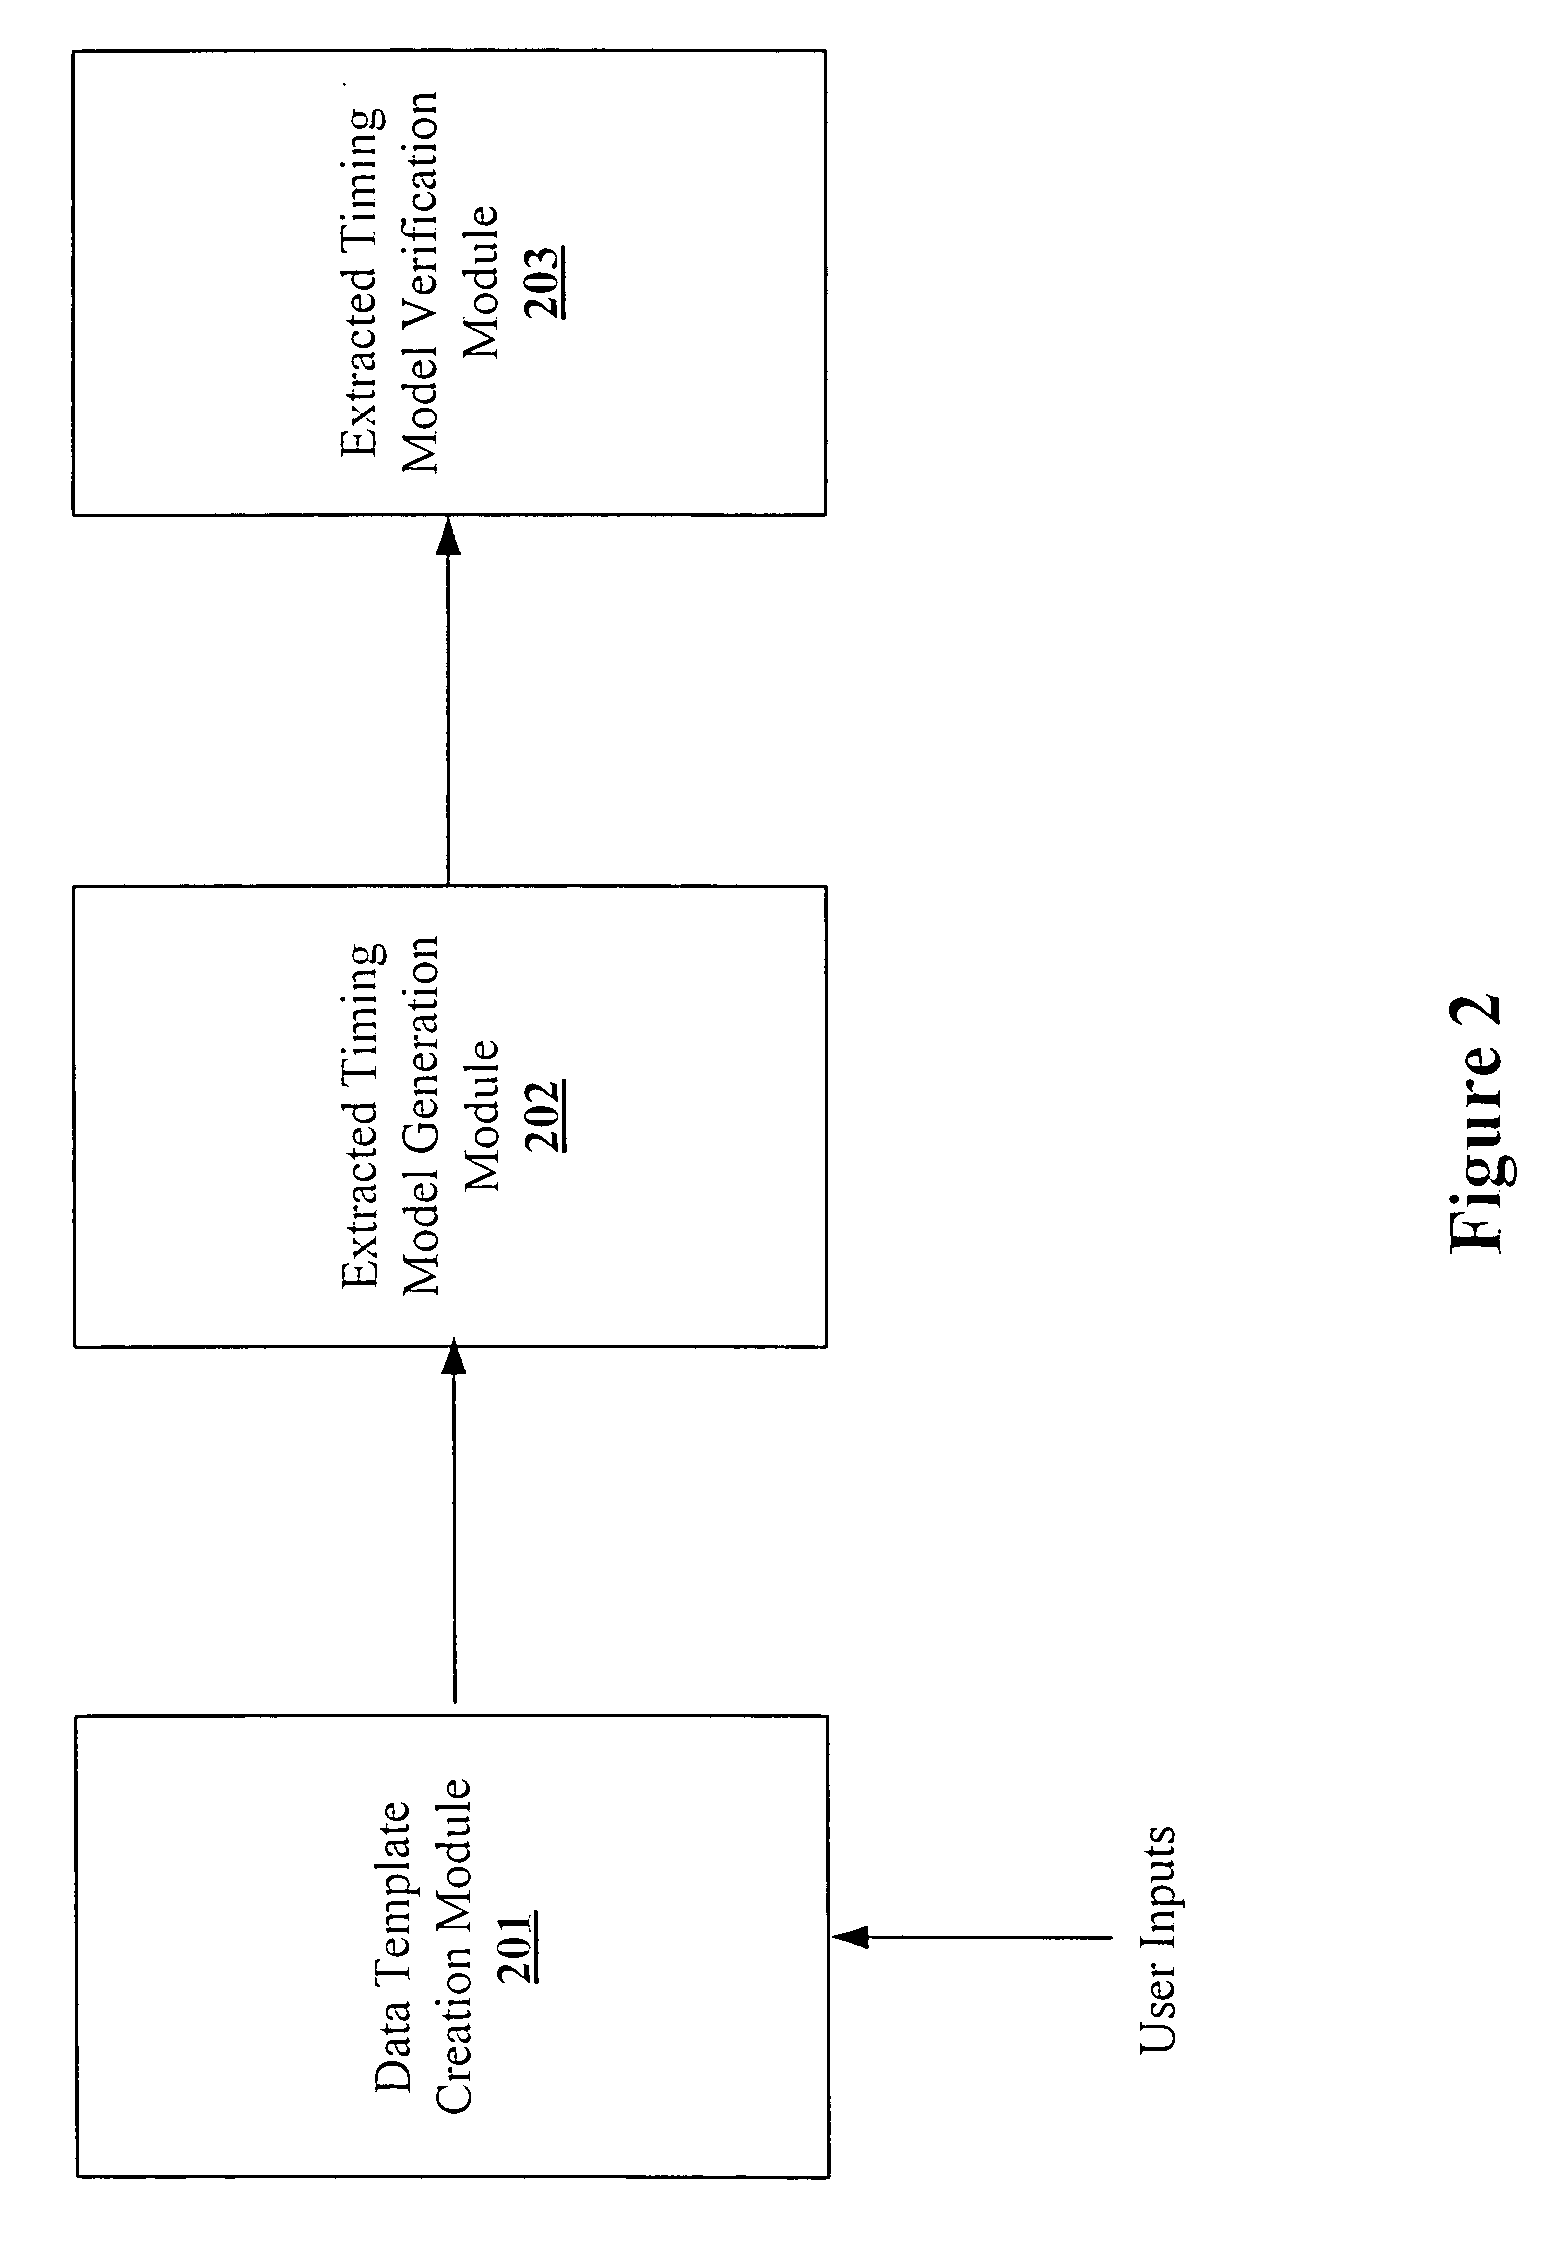 Verification of an extracted timing model file